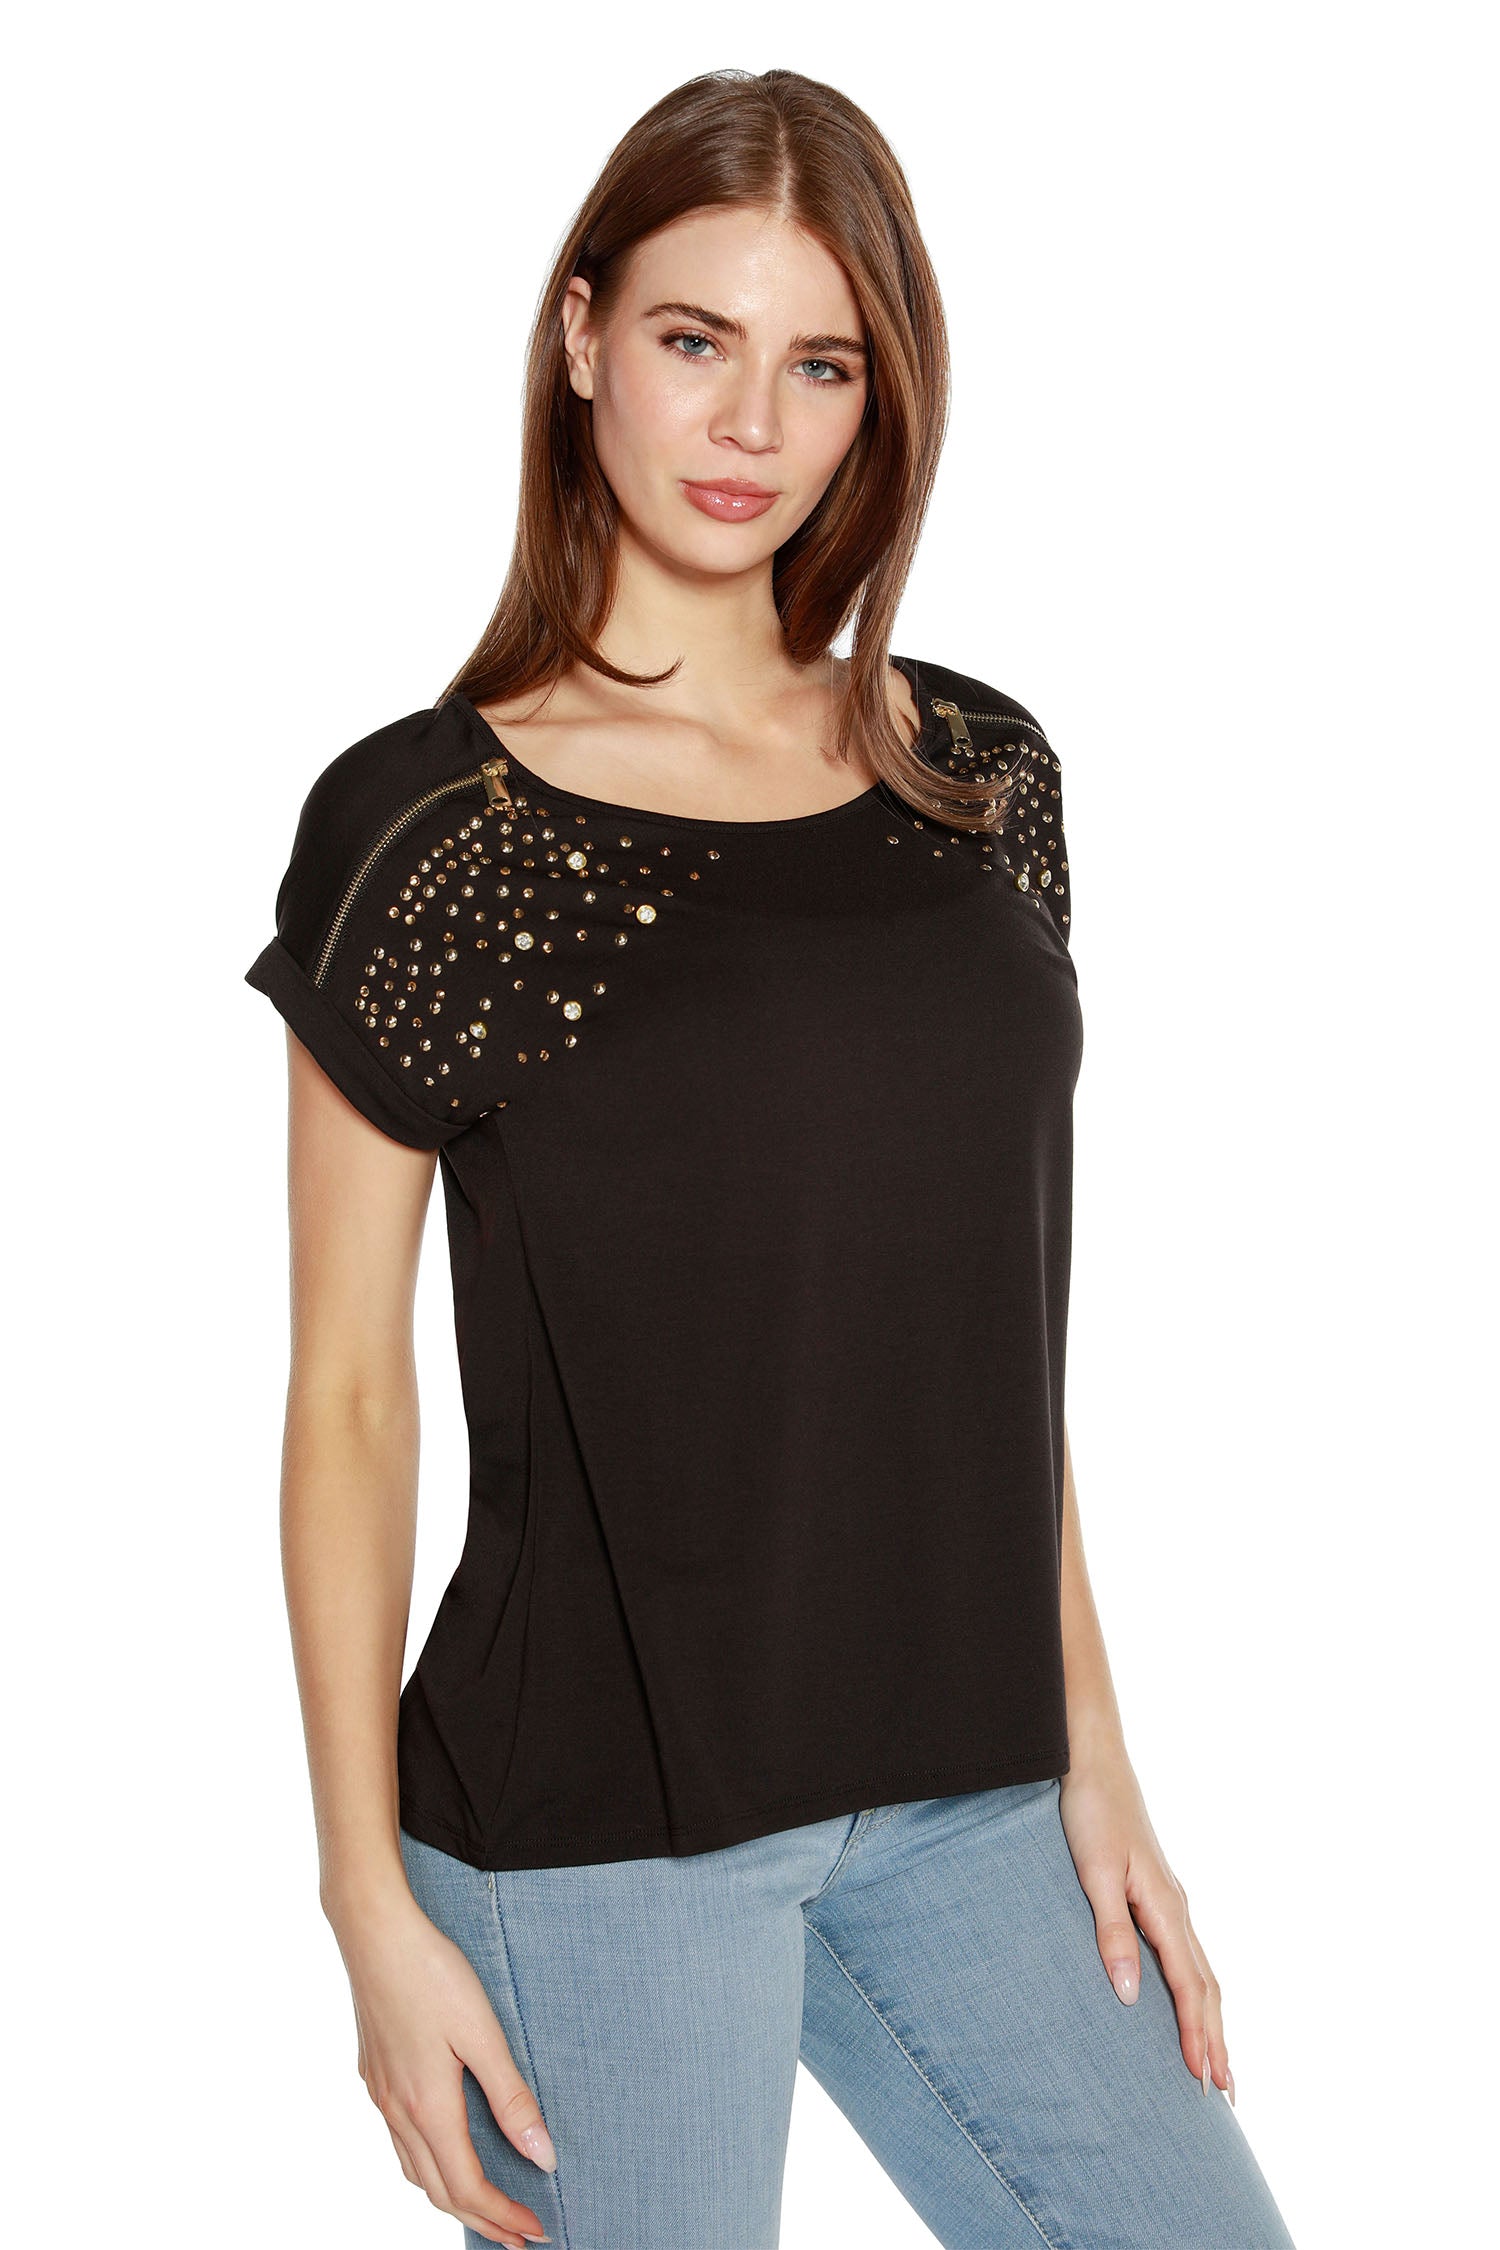 Women's Cap Sleeve Top with Zippers, Rhinestone and Stud Embellishments